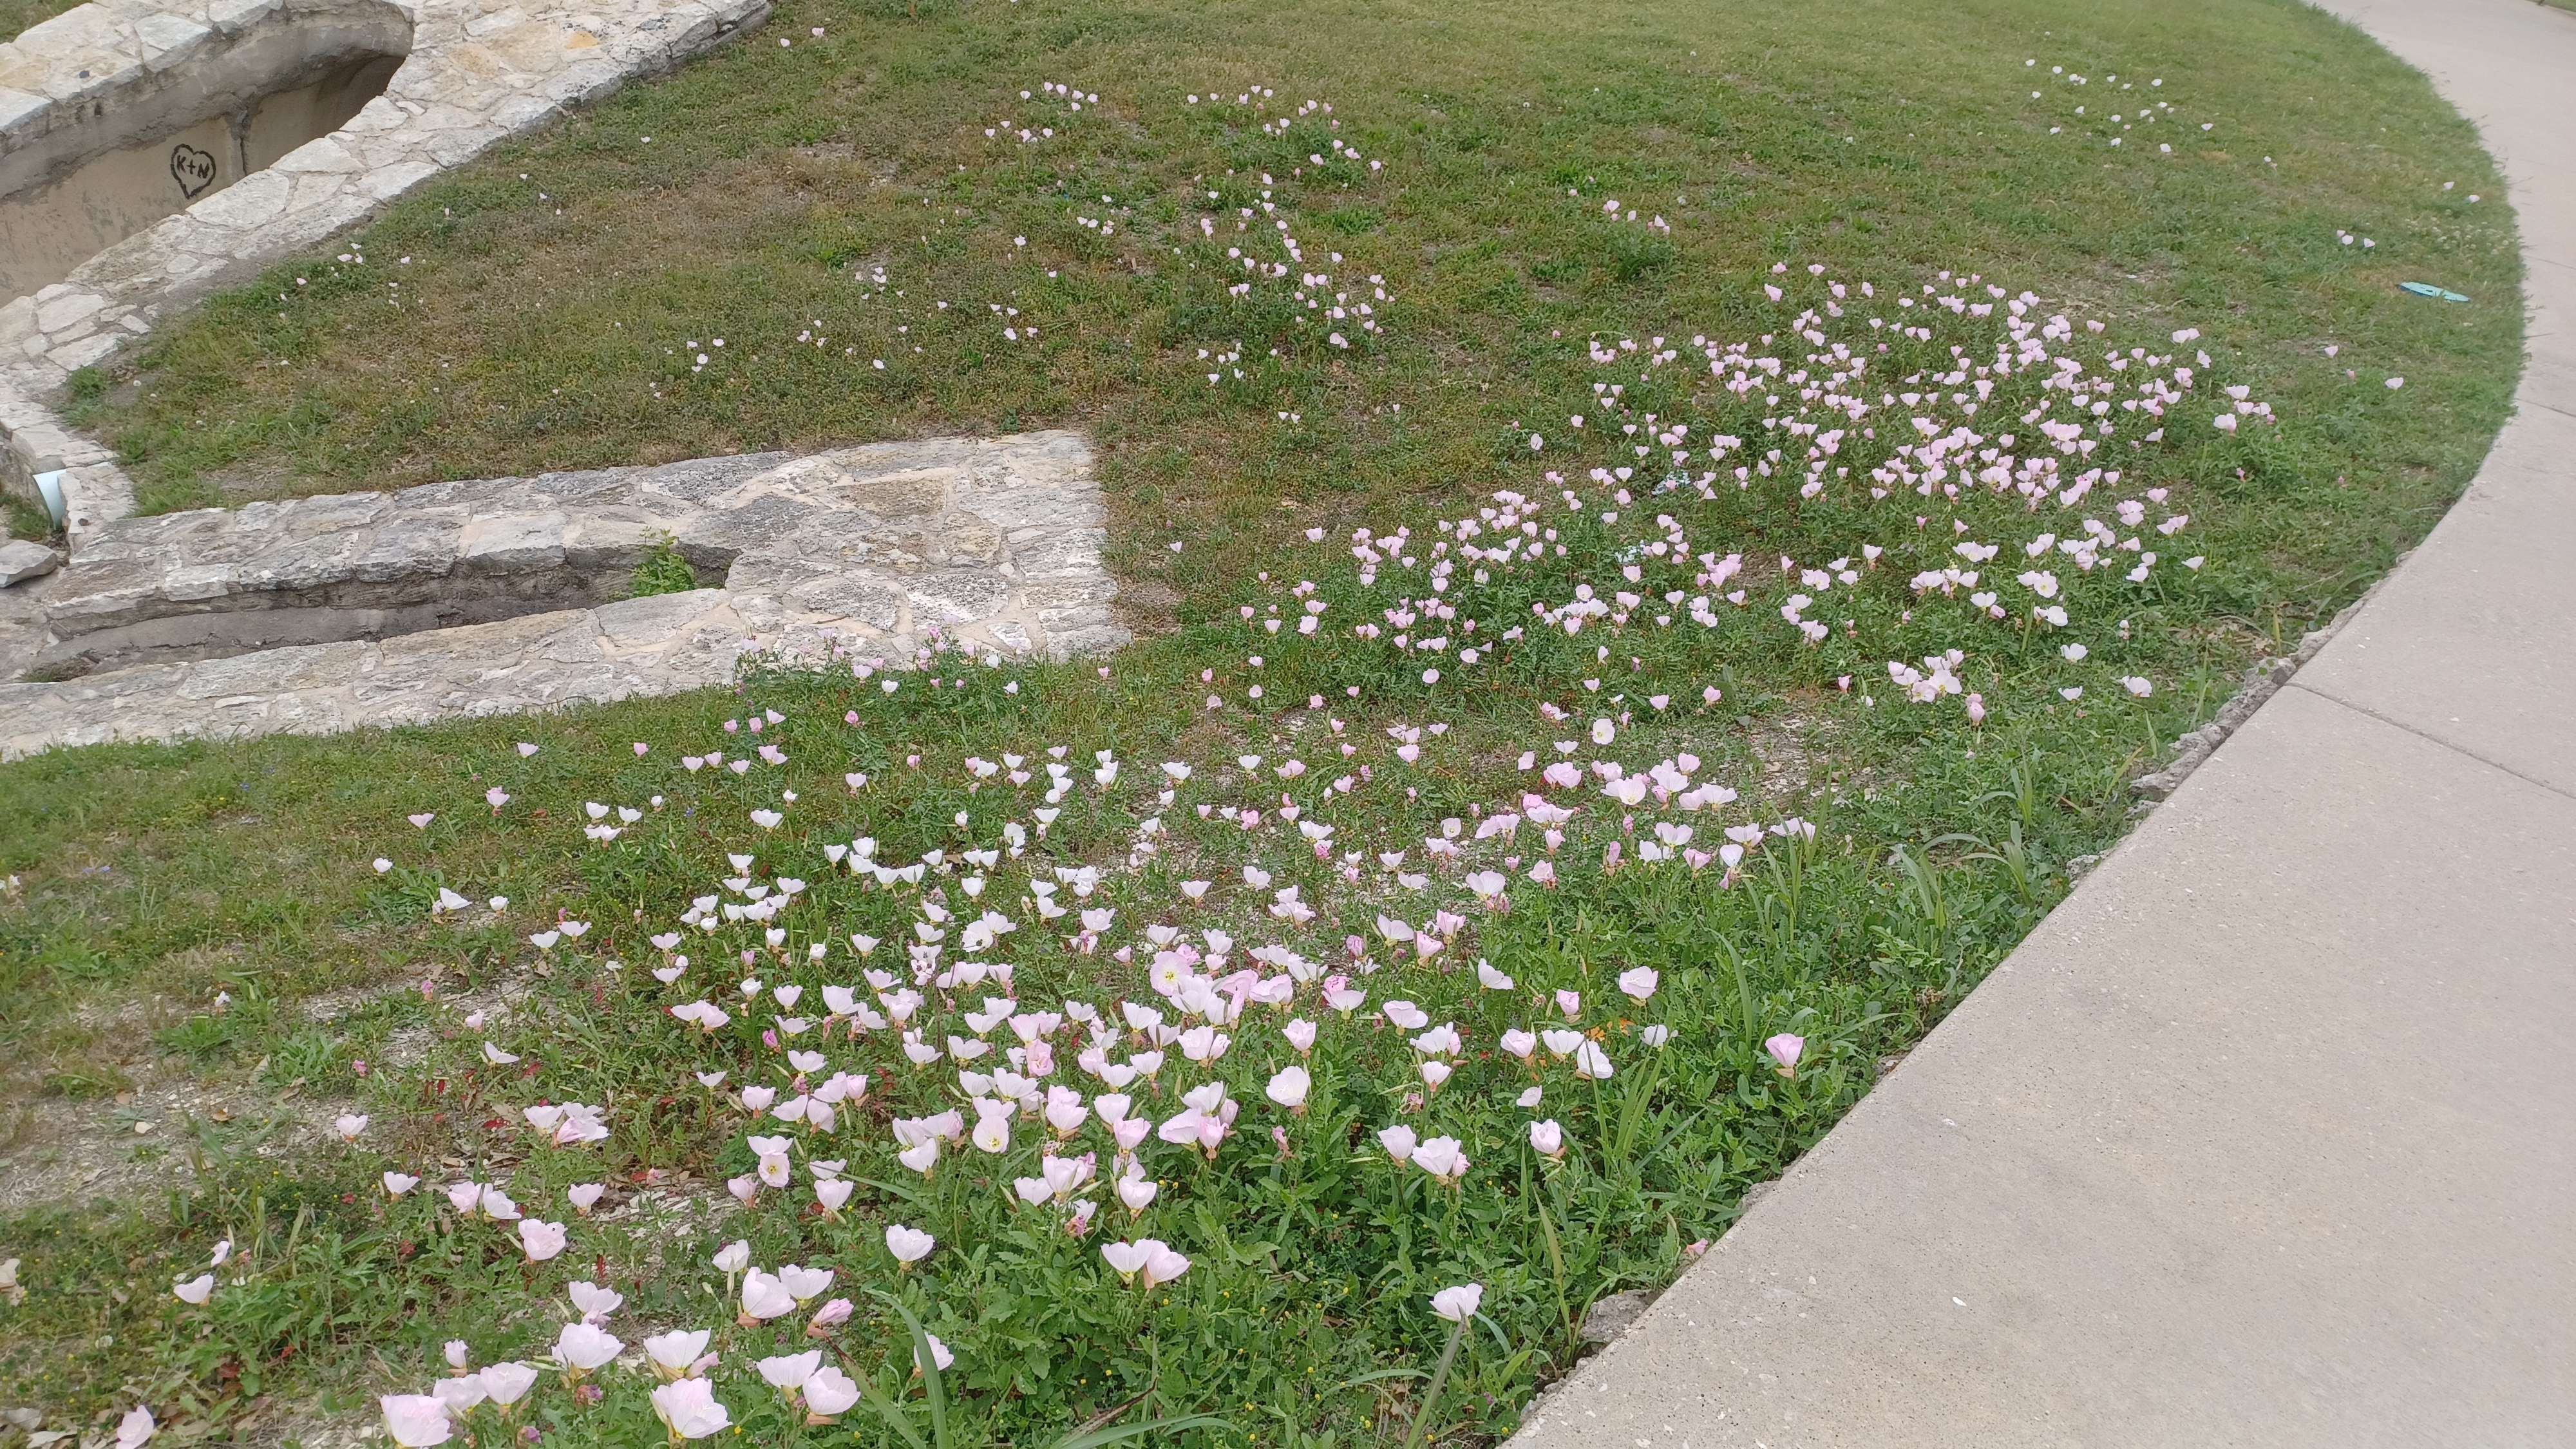 a photo of several pink flowers in some grass. on the far right of the photo, a sidewalk wraps around the flowers.